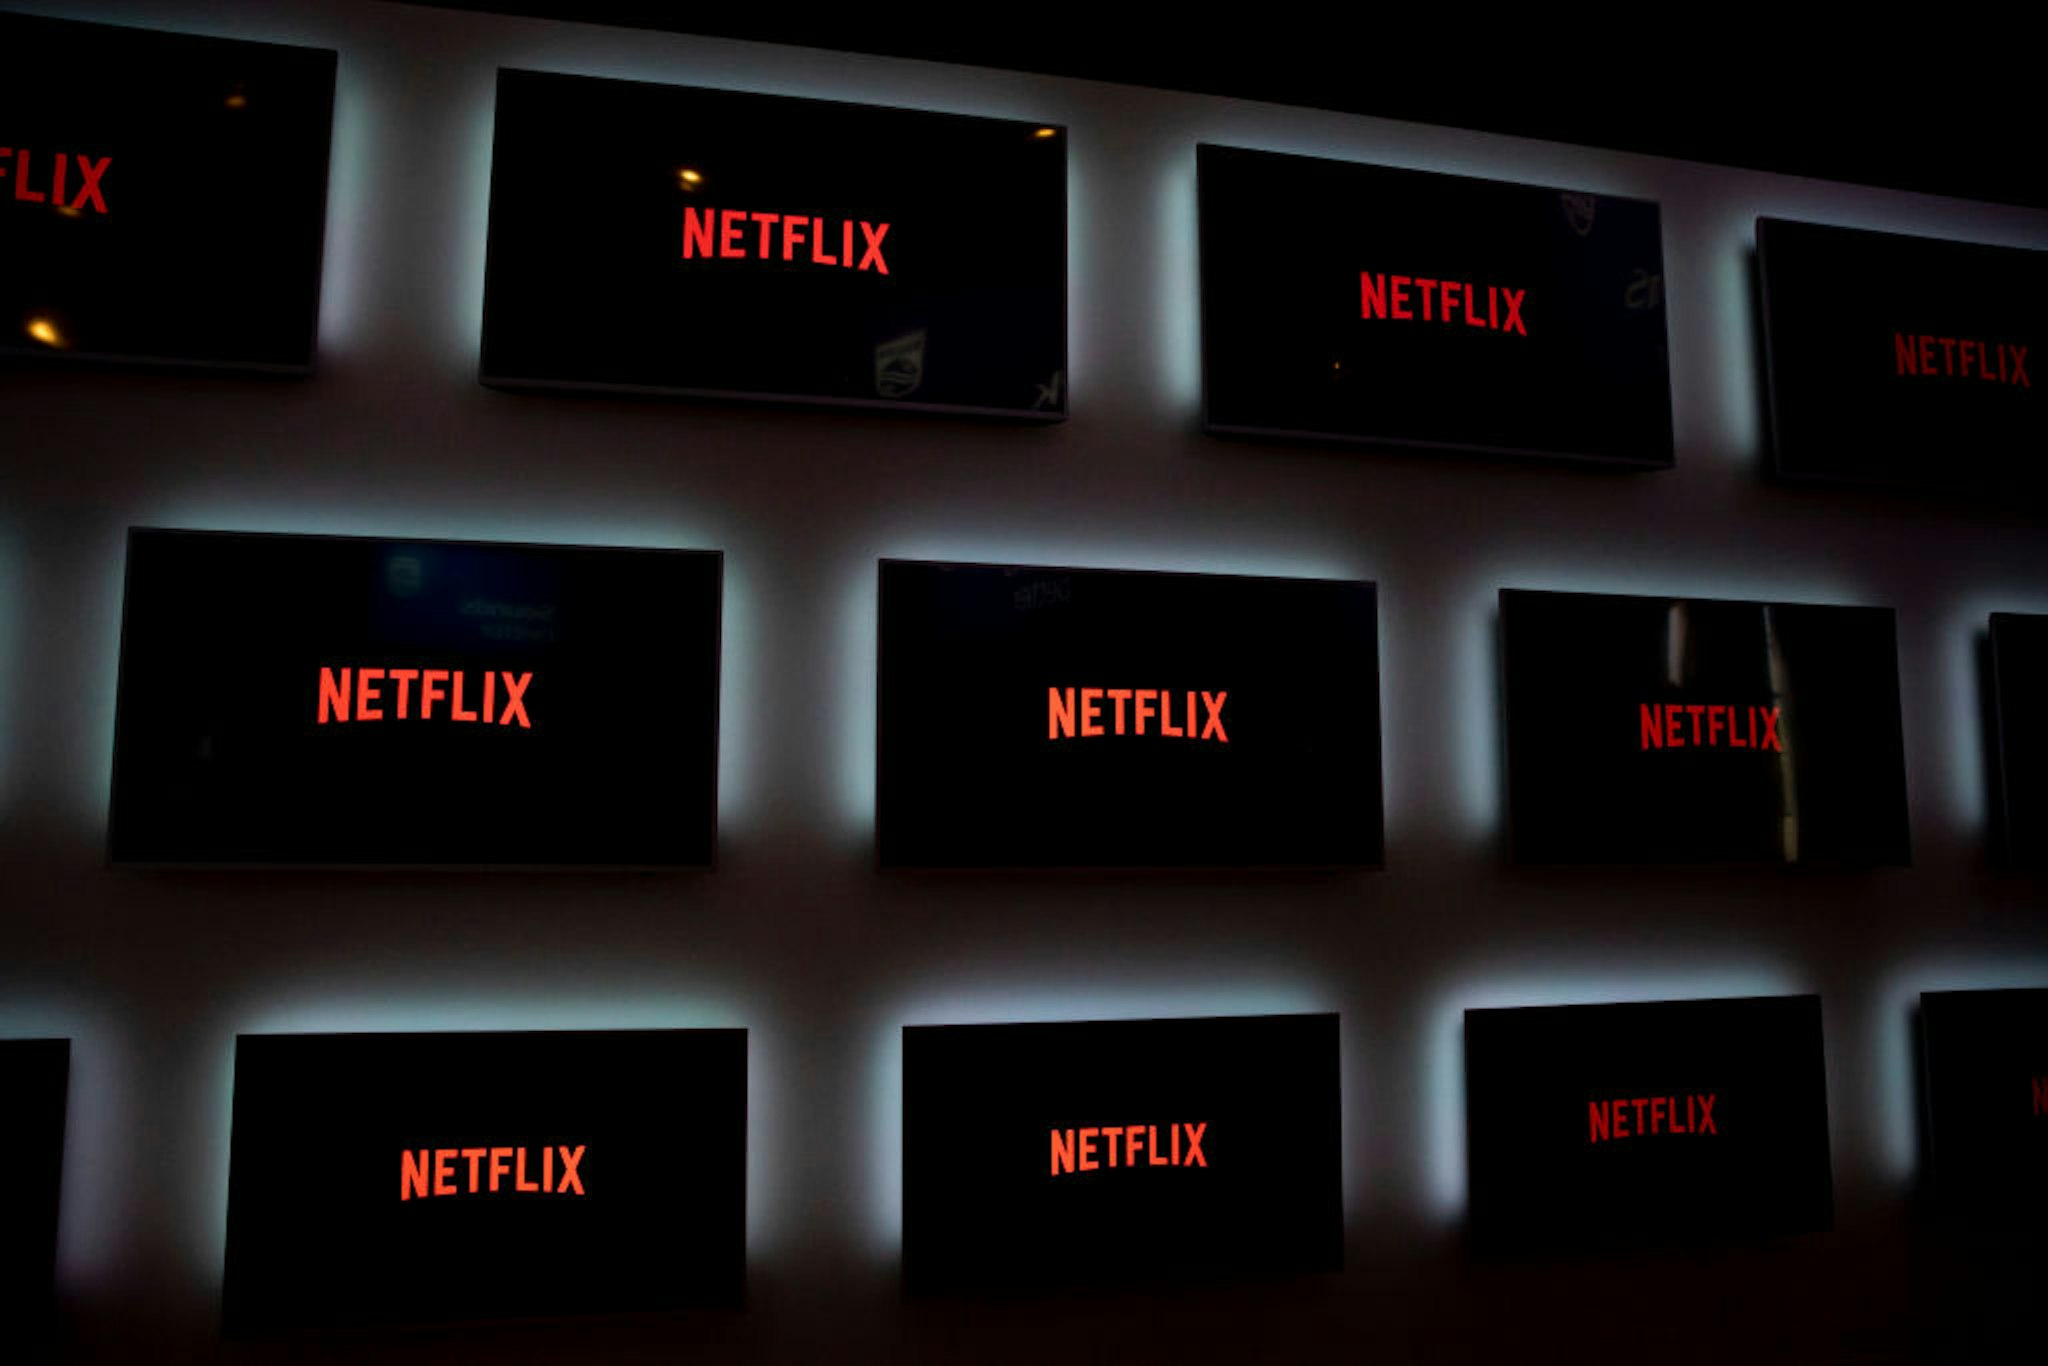 Monitors with Netflix logo are pictured during the international electronics and innovation fair IFA in Berlin on September 10, 2019.